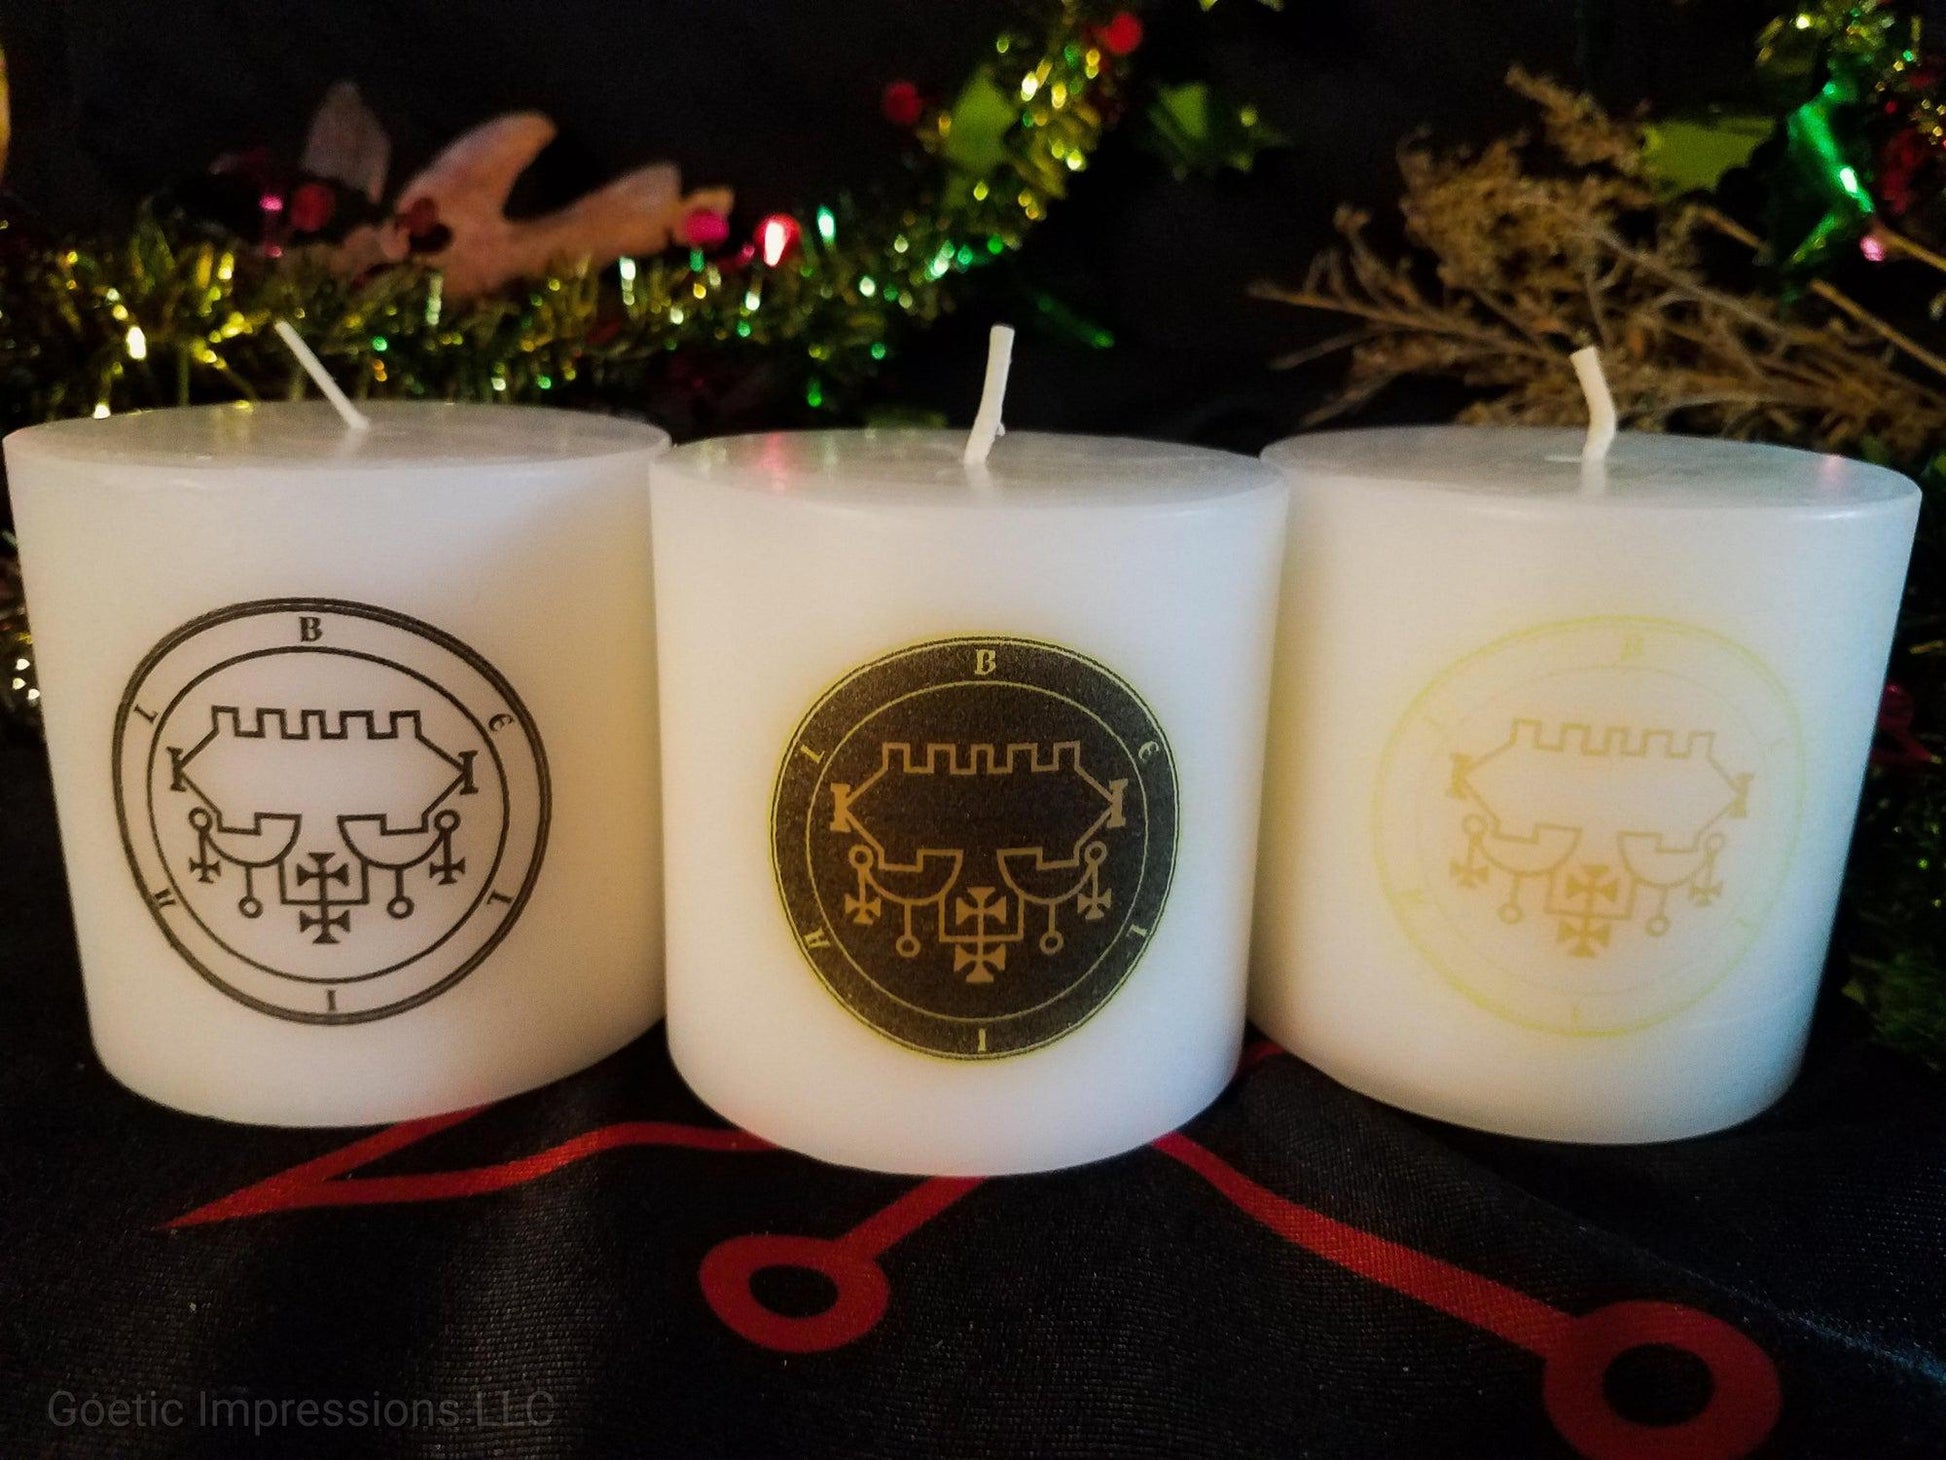 Ars Goetia Belial seal imprinted on white candles